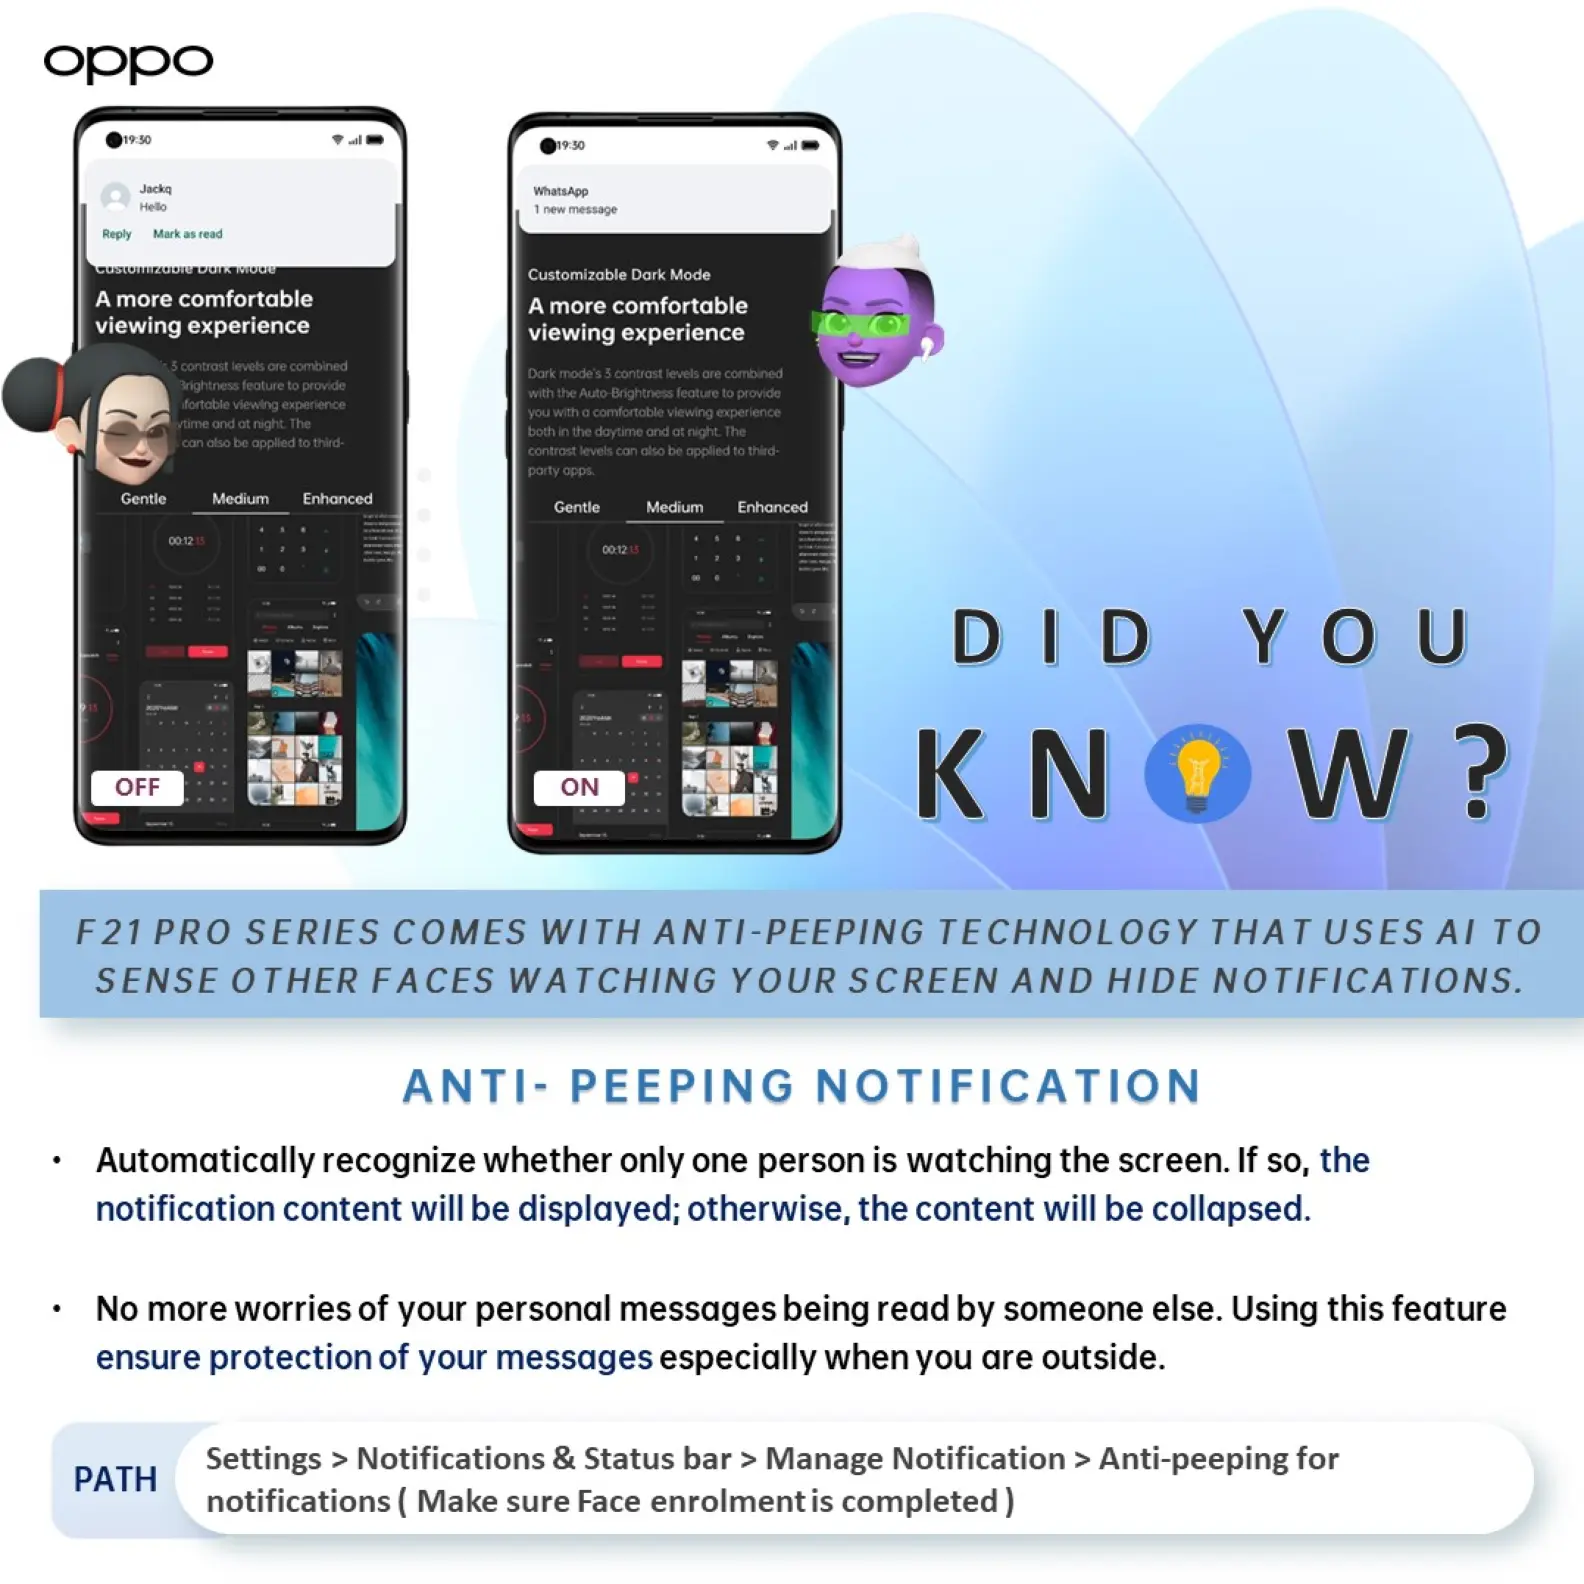 DidYouKnow? About the Anti-peeping Feature in #ColorOS, OPPO F21 Pro